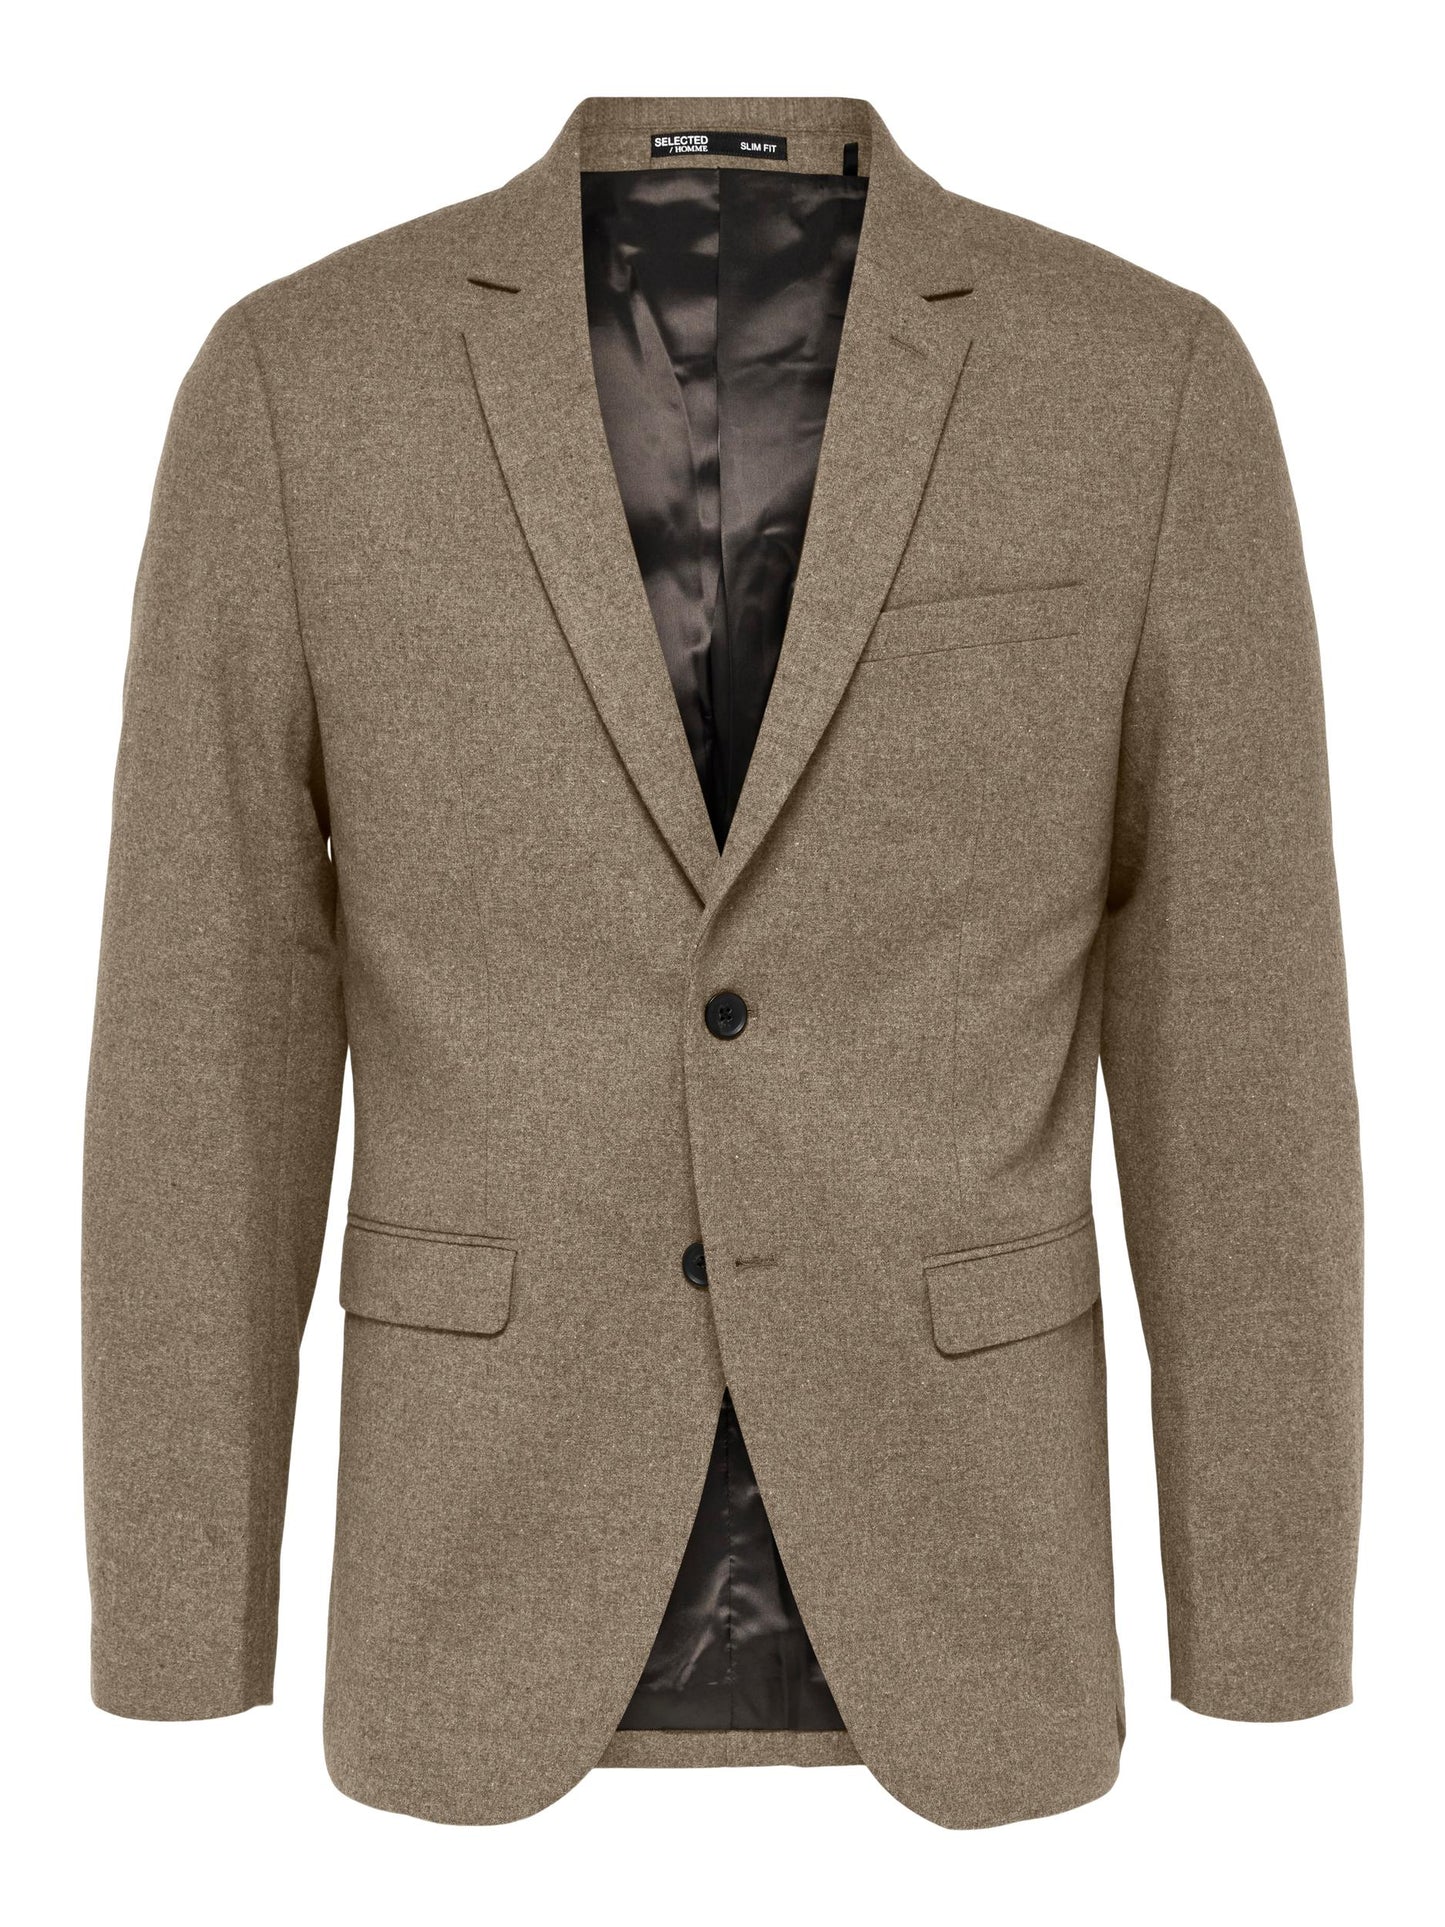 SELECTED HOMME Blazer Brown